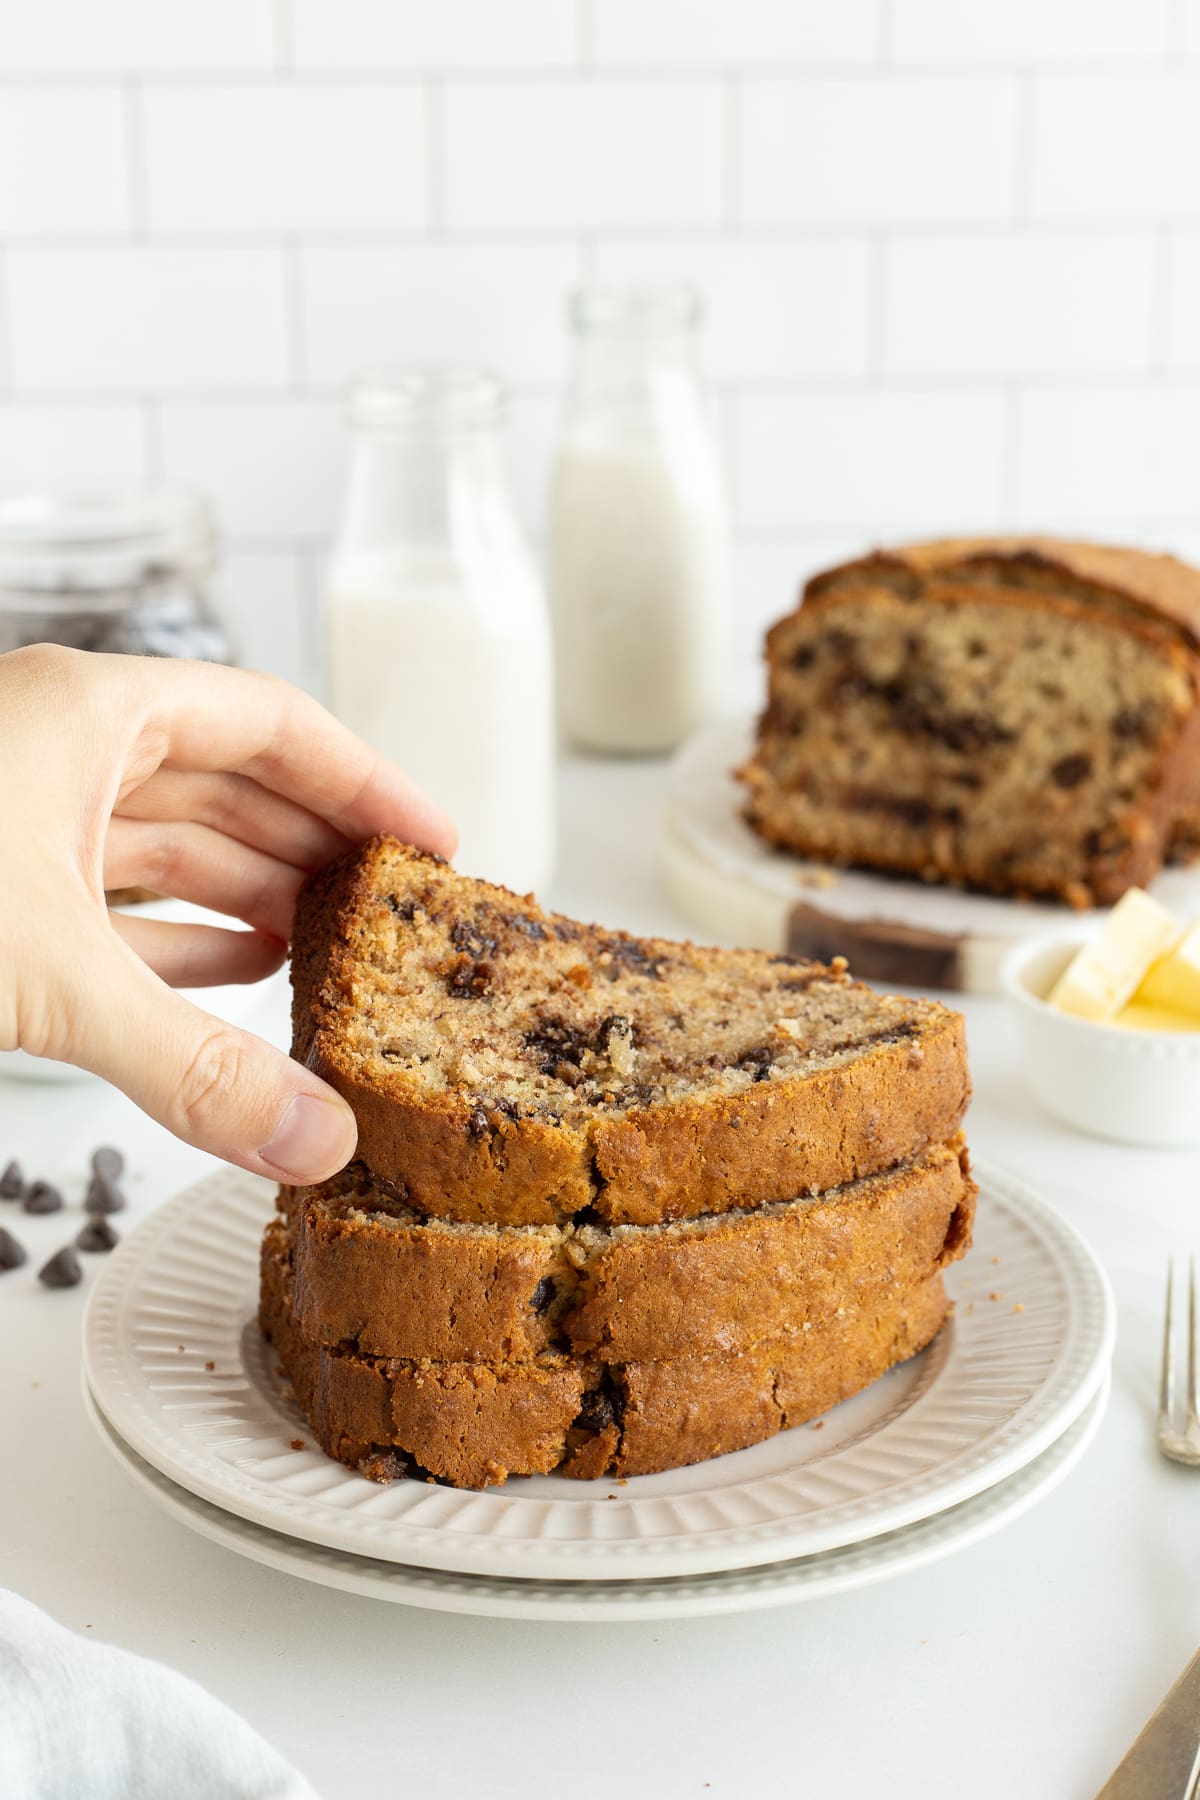 A hand lifting a slice of chocolate chip banana bread off a stack of three slices.